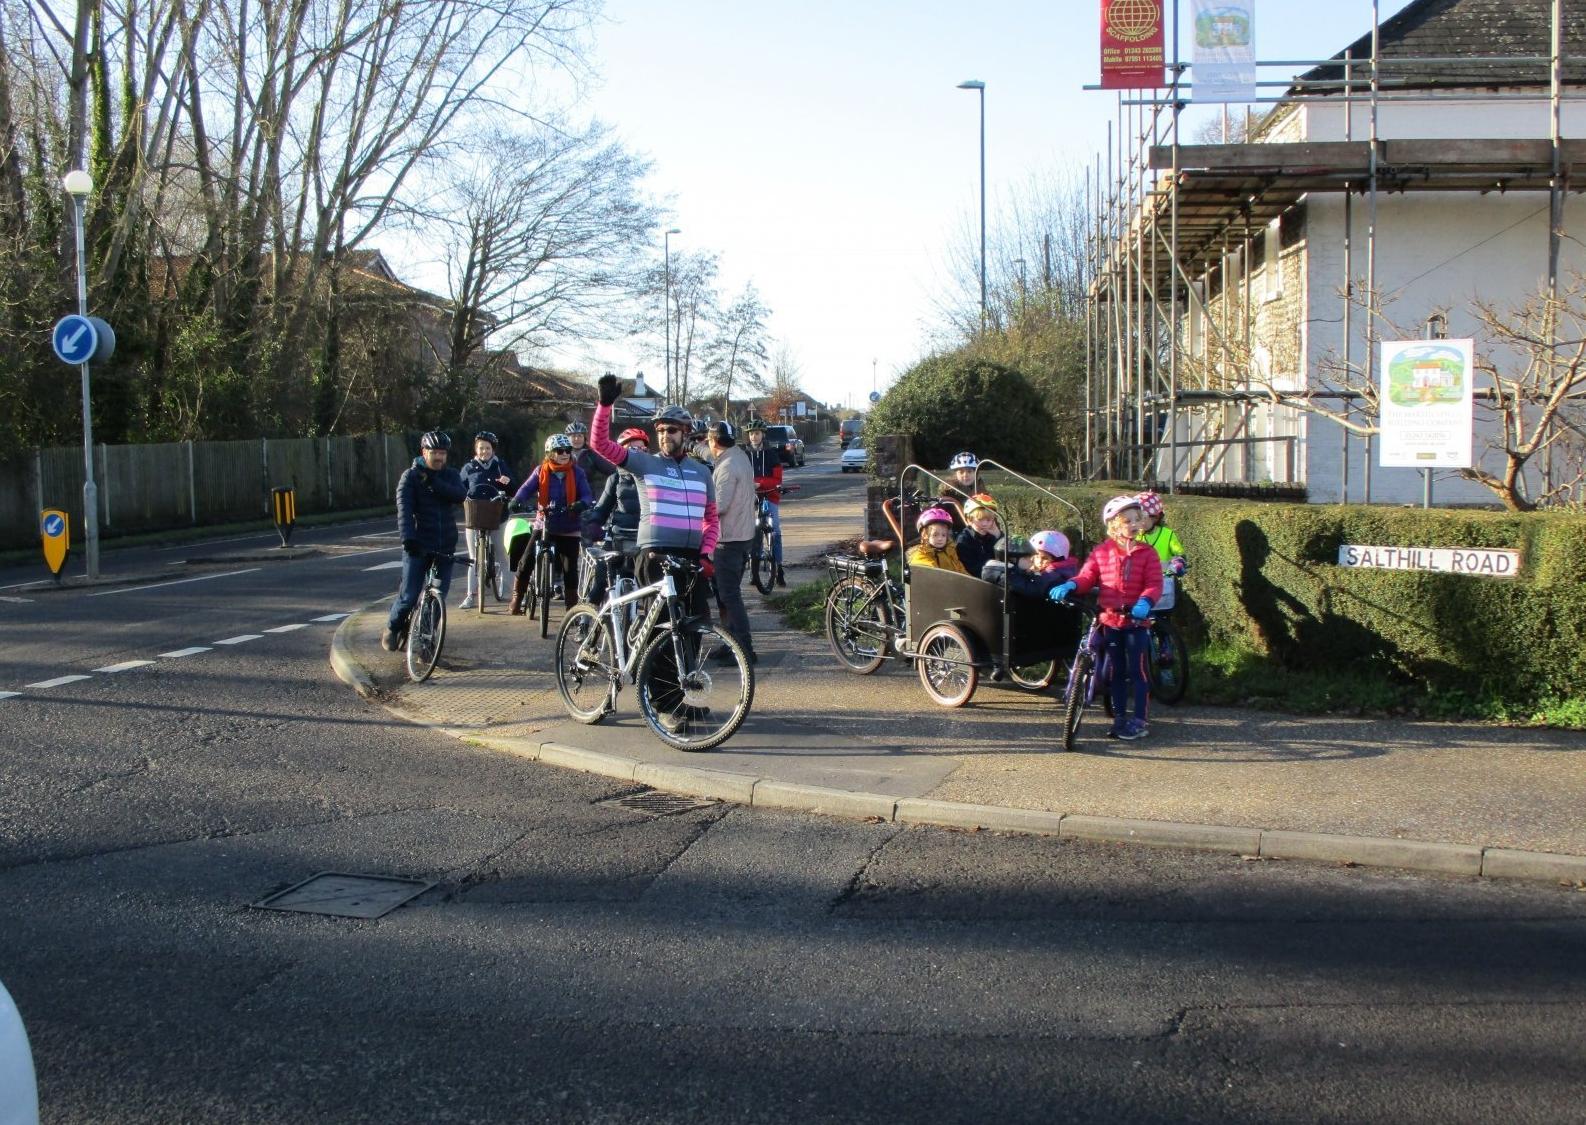 Following the death of well-known Bosham cyclist Gina McWilliam, a group of campaigners paid their respects and appealed for changes to the ‘inadequate’ road system at a well-attended event on Sunday. SUS-200122-104659001